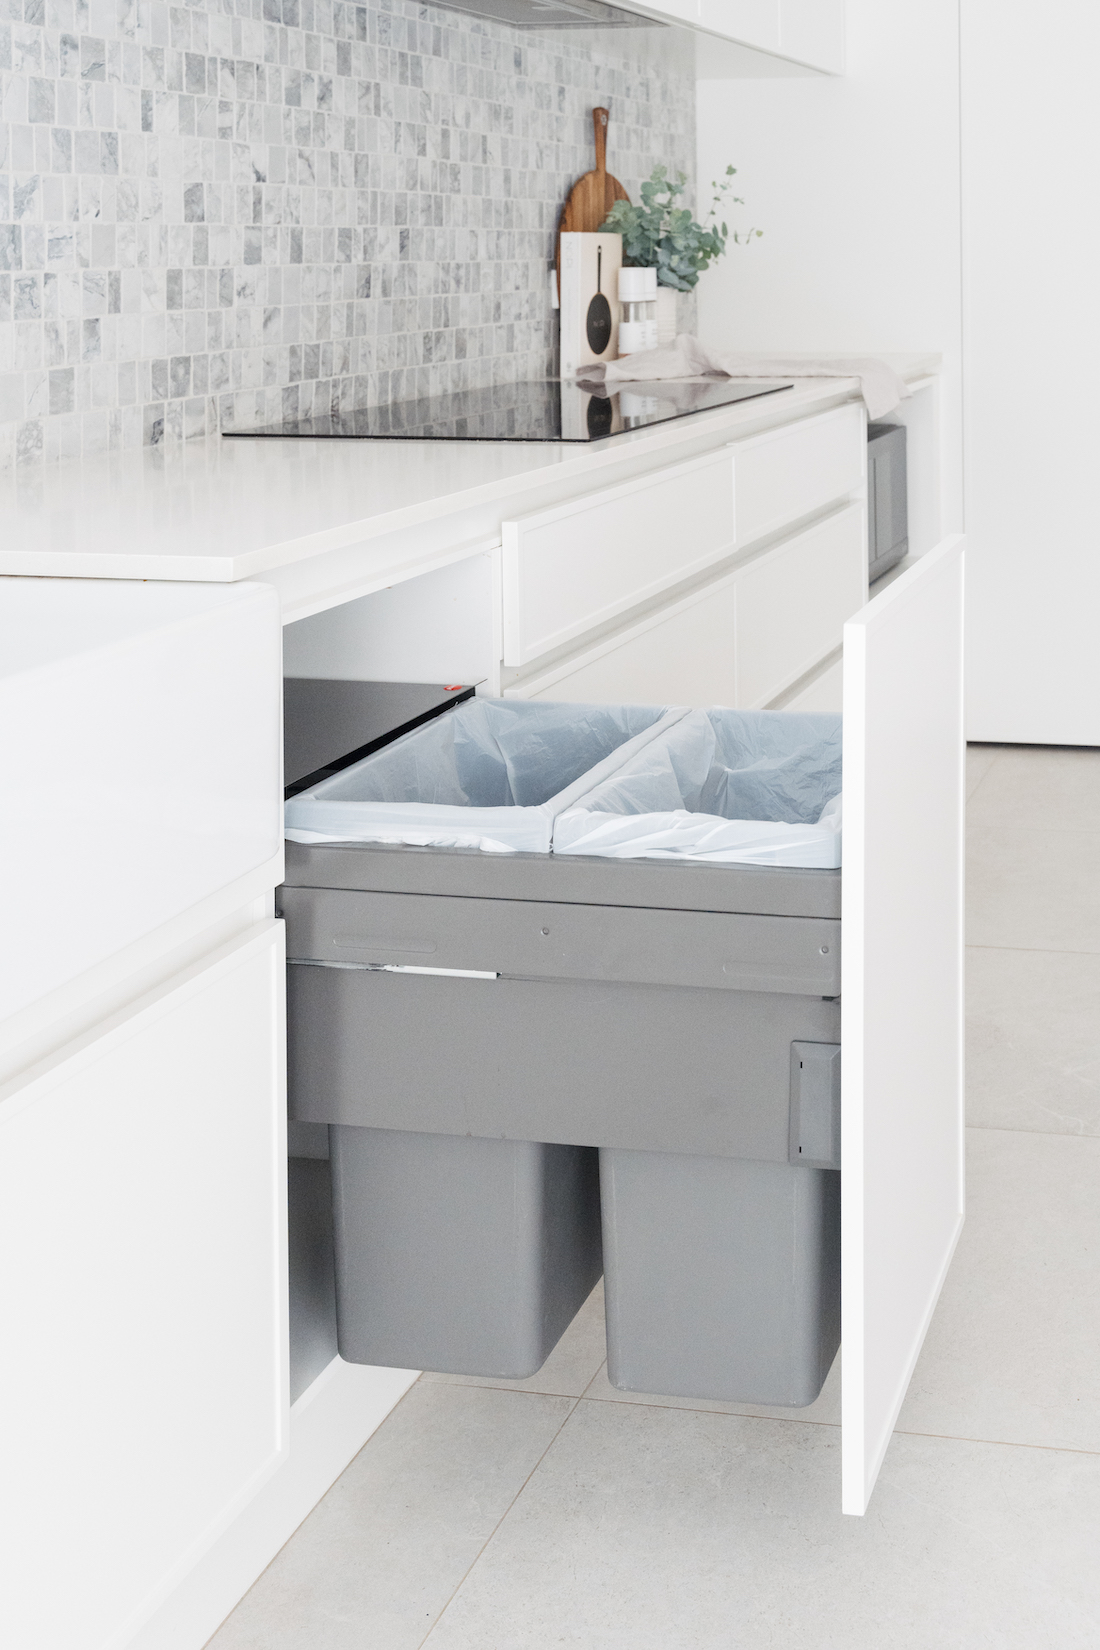 Large pull out bin in kitchen Slim shaker cabinets